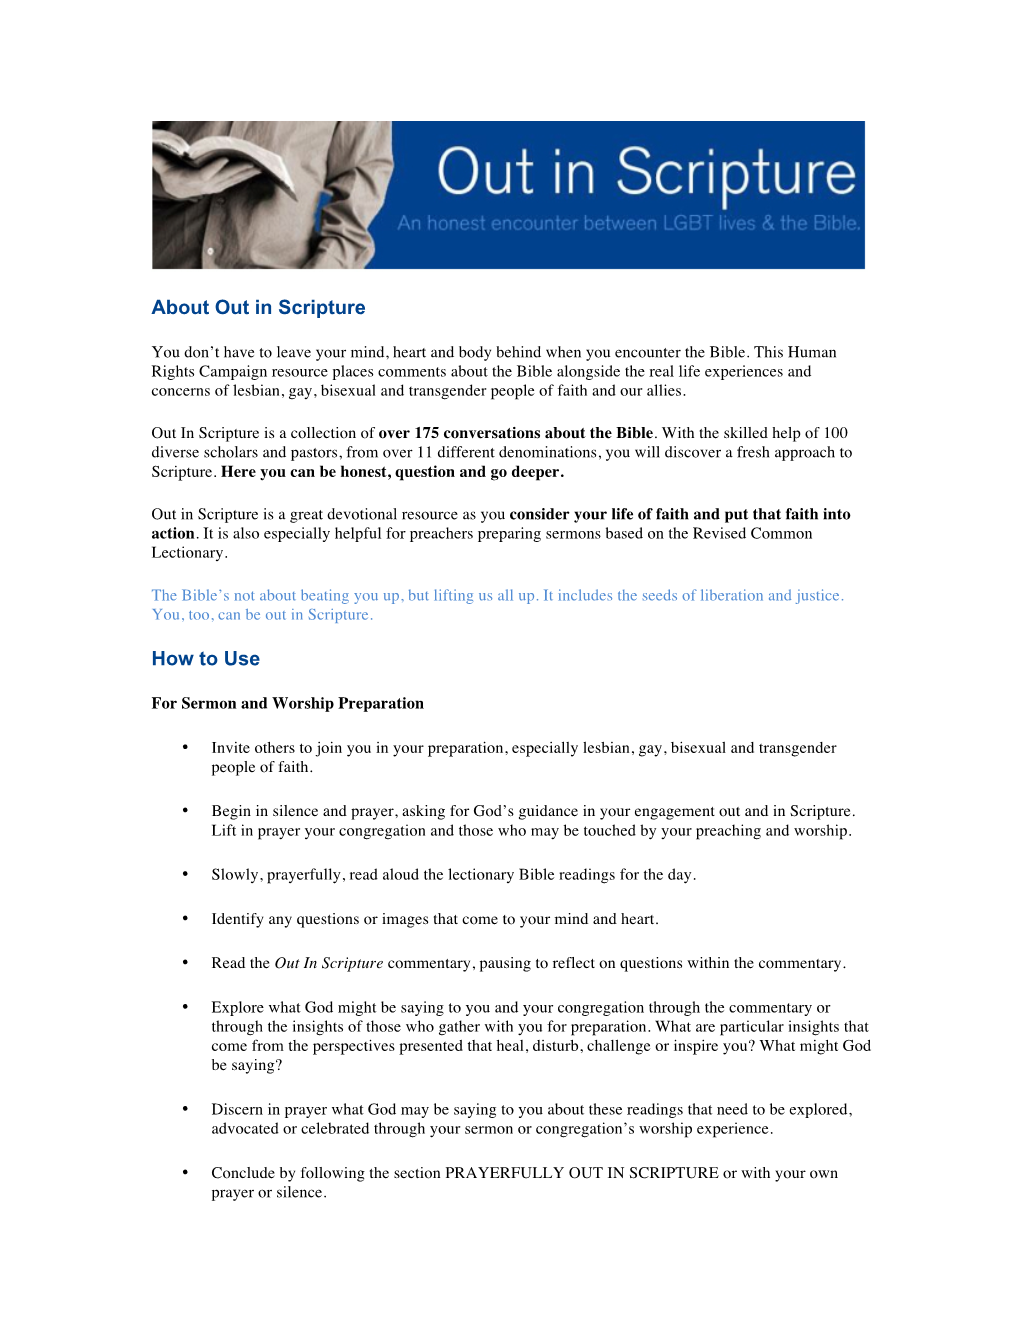 About out in Scripture How To